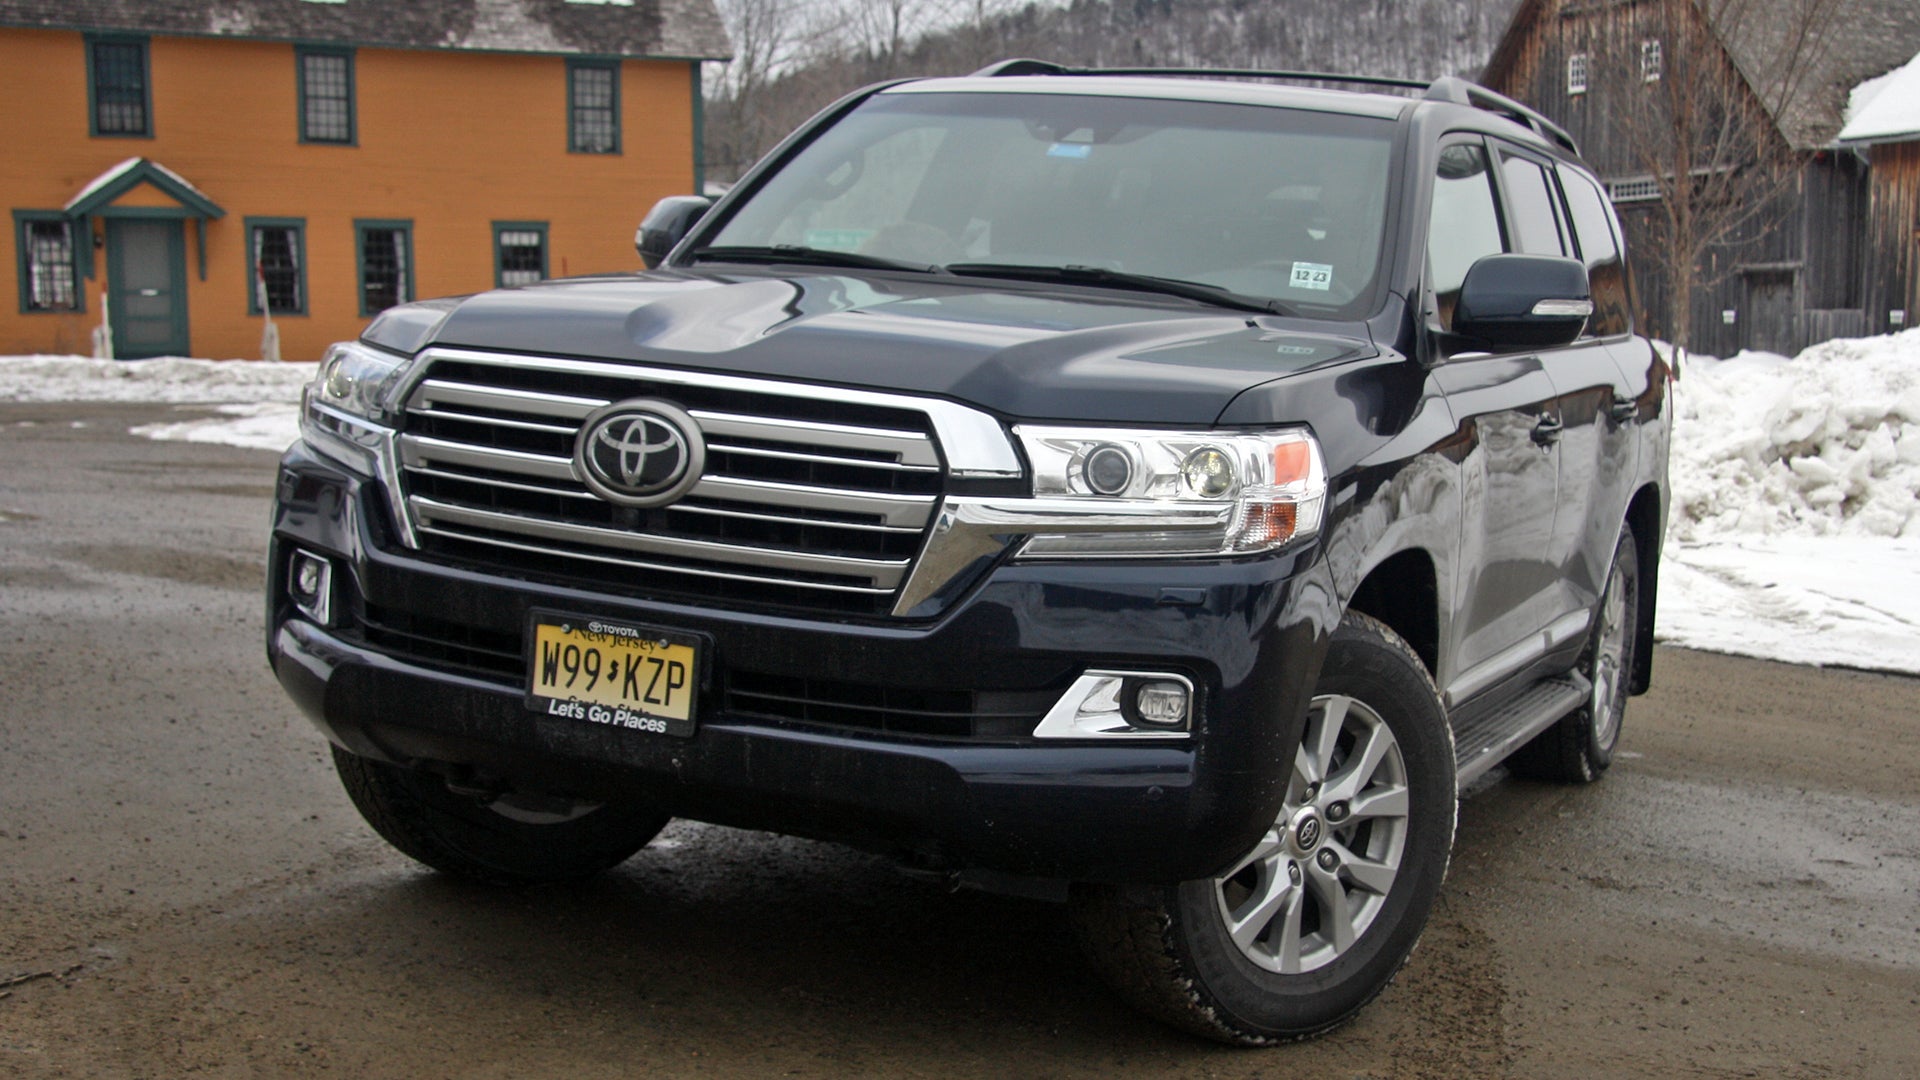 2019 Toyota Land Cruiser New Dad Review: A Big, Capable, and Outdated SUV